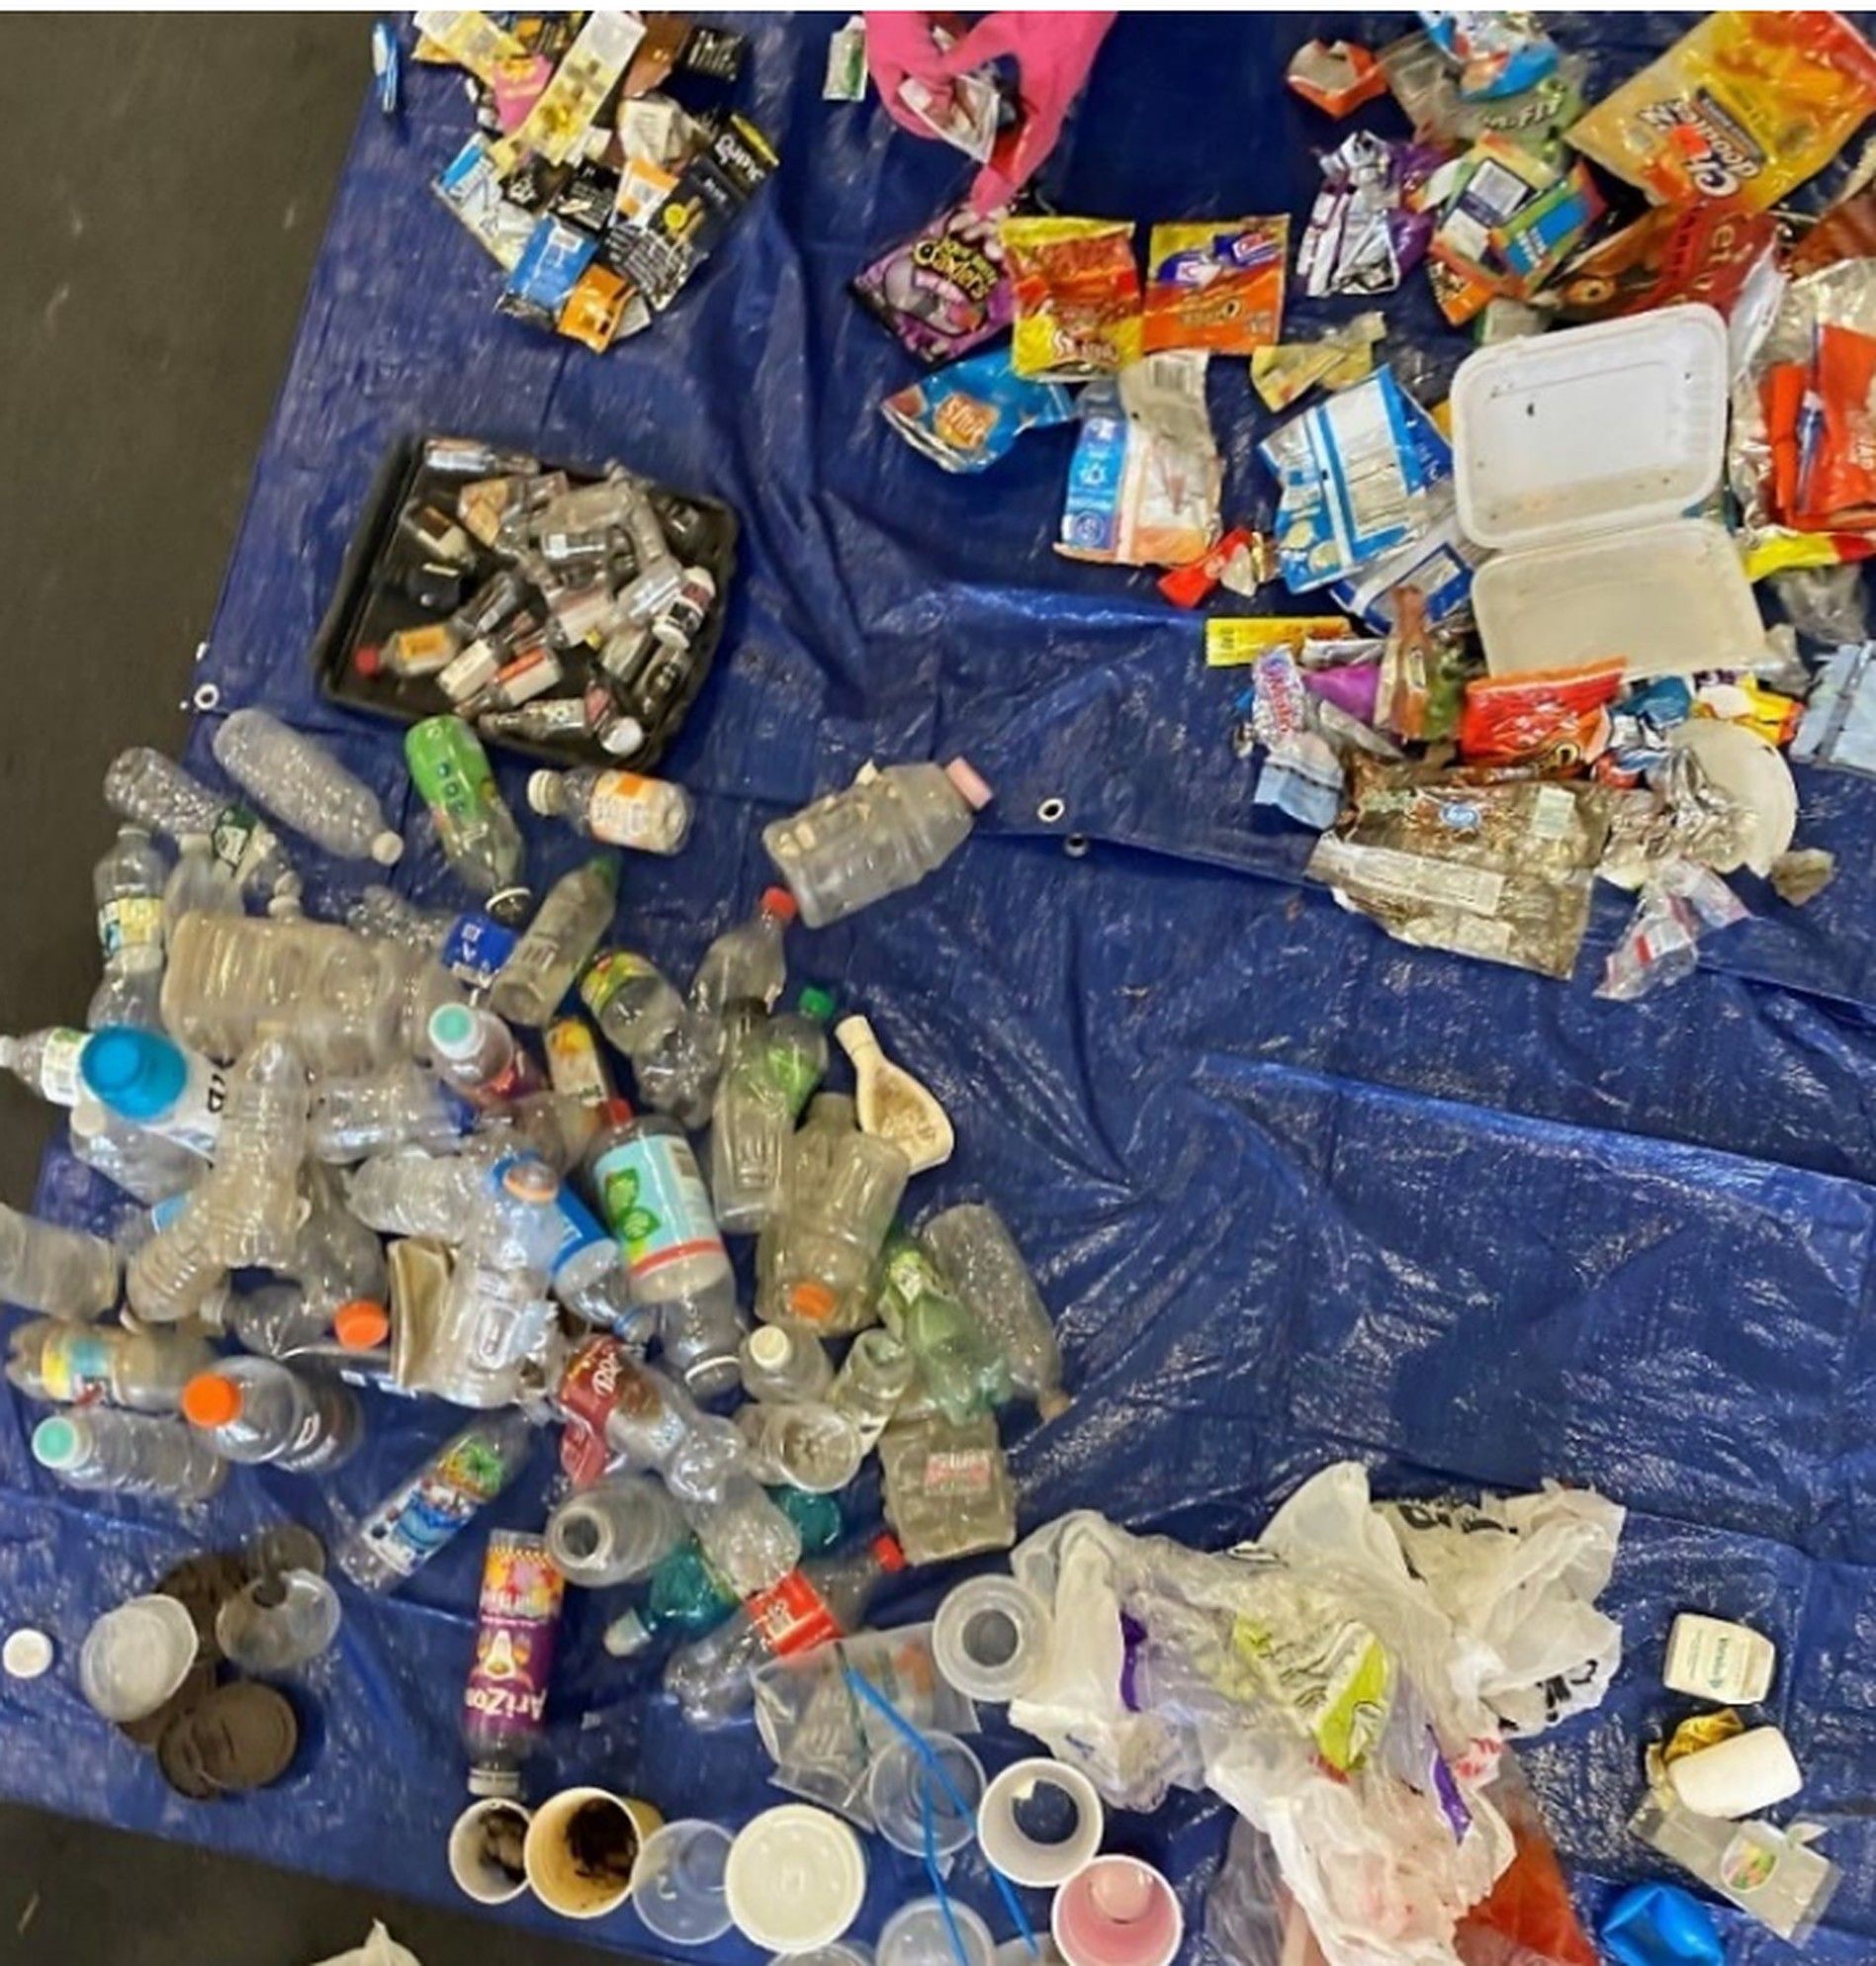 Plastic waste collected in April 2022 from the Erie Basin Marina in the City of Buffalo, including Gatorade bottles and Lay’s potato chip packaging produced by PepsiCo.